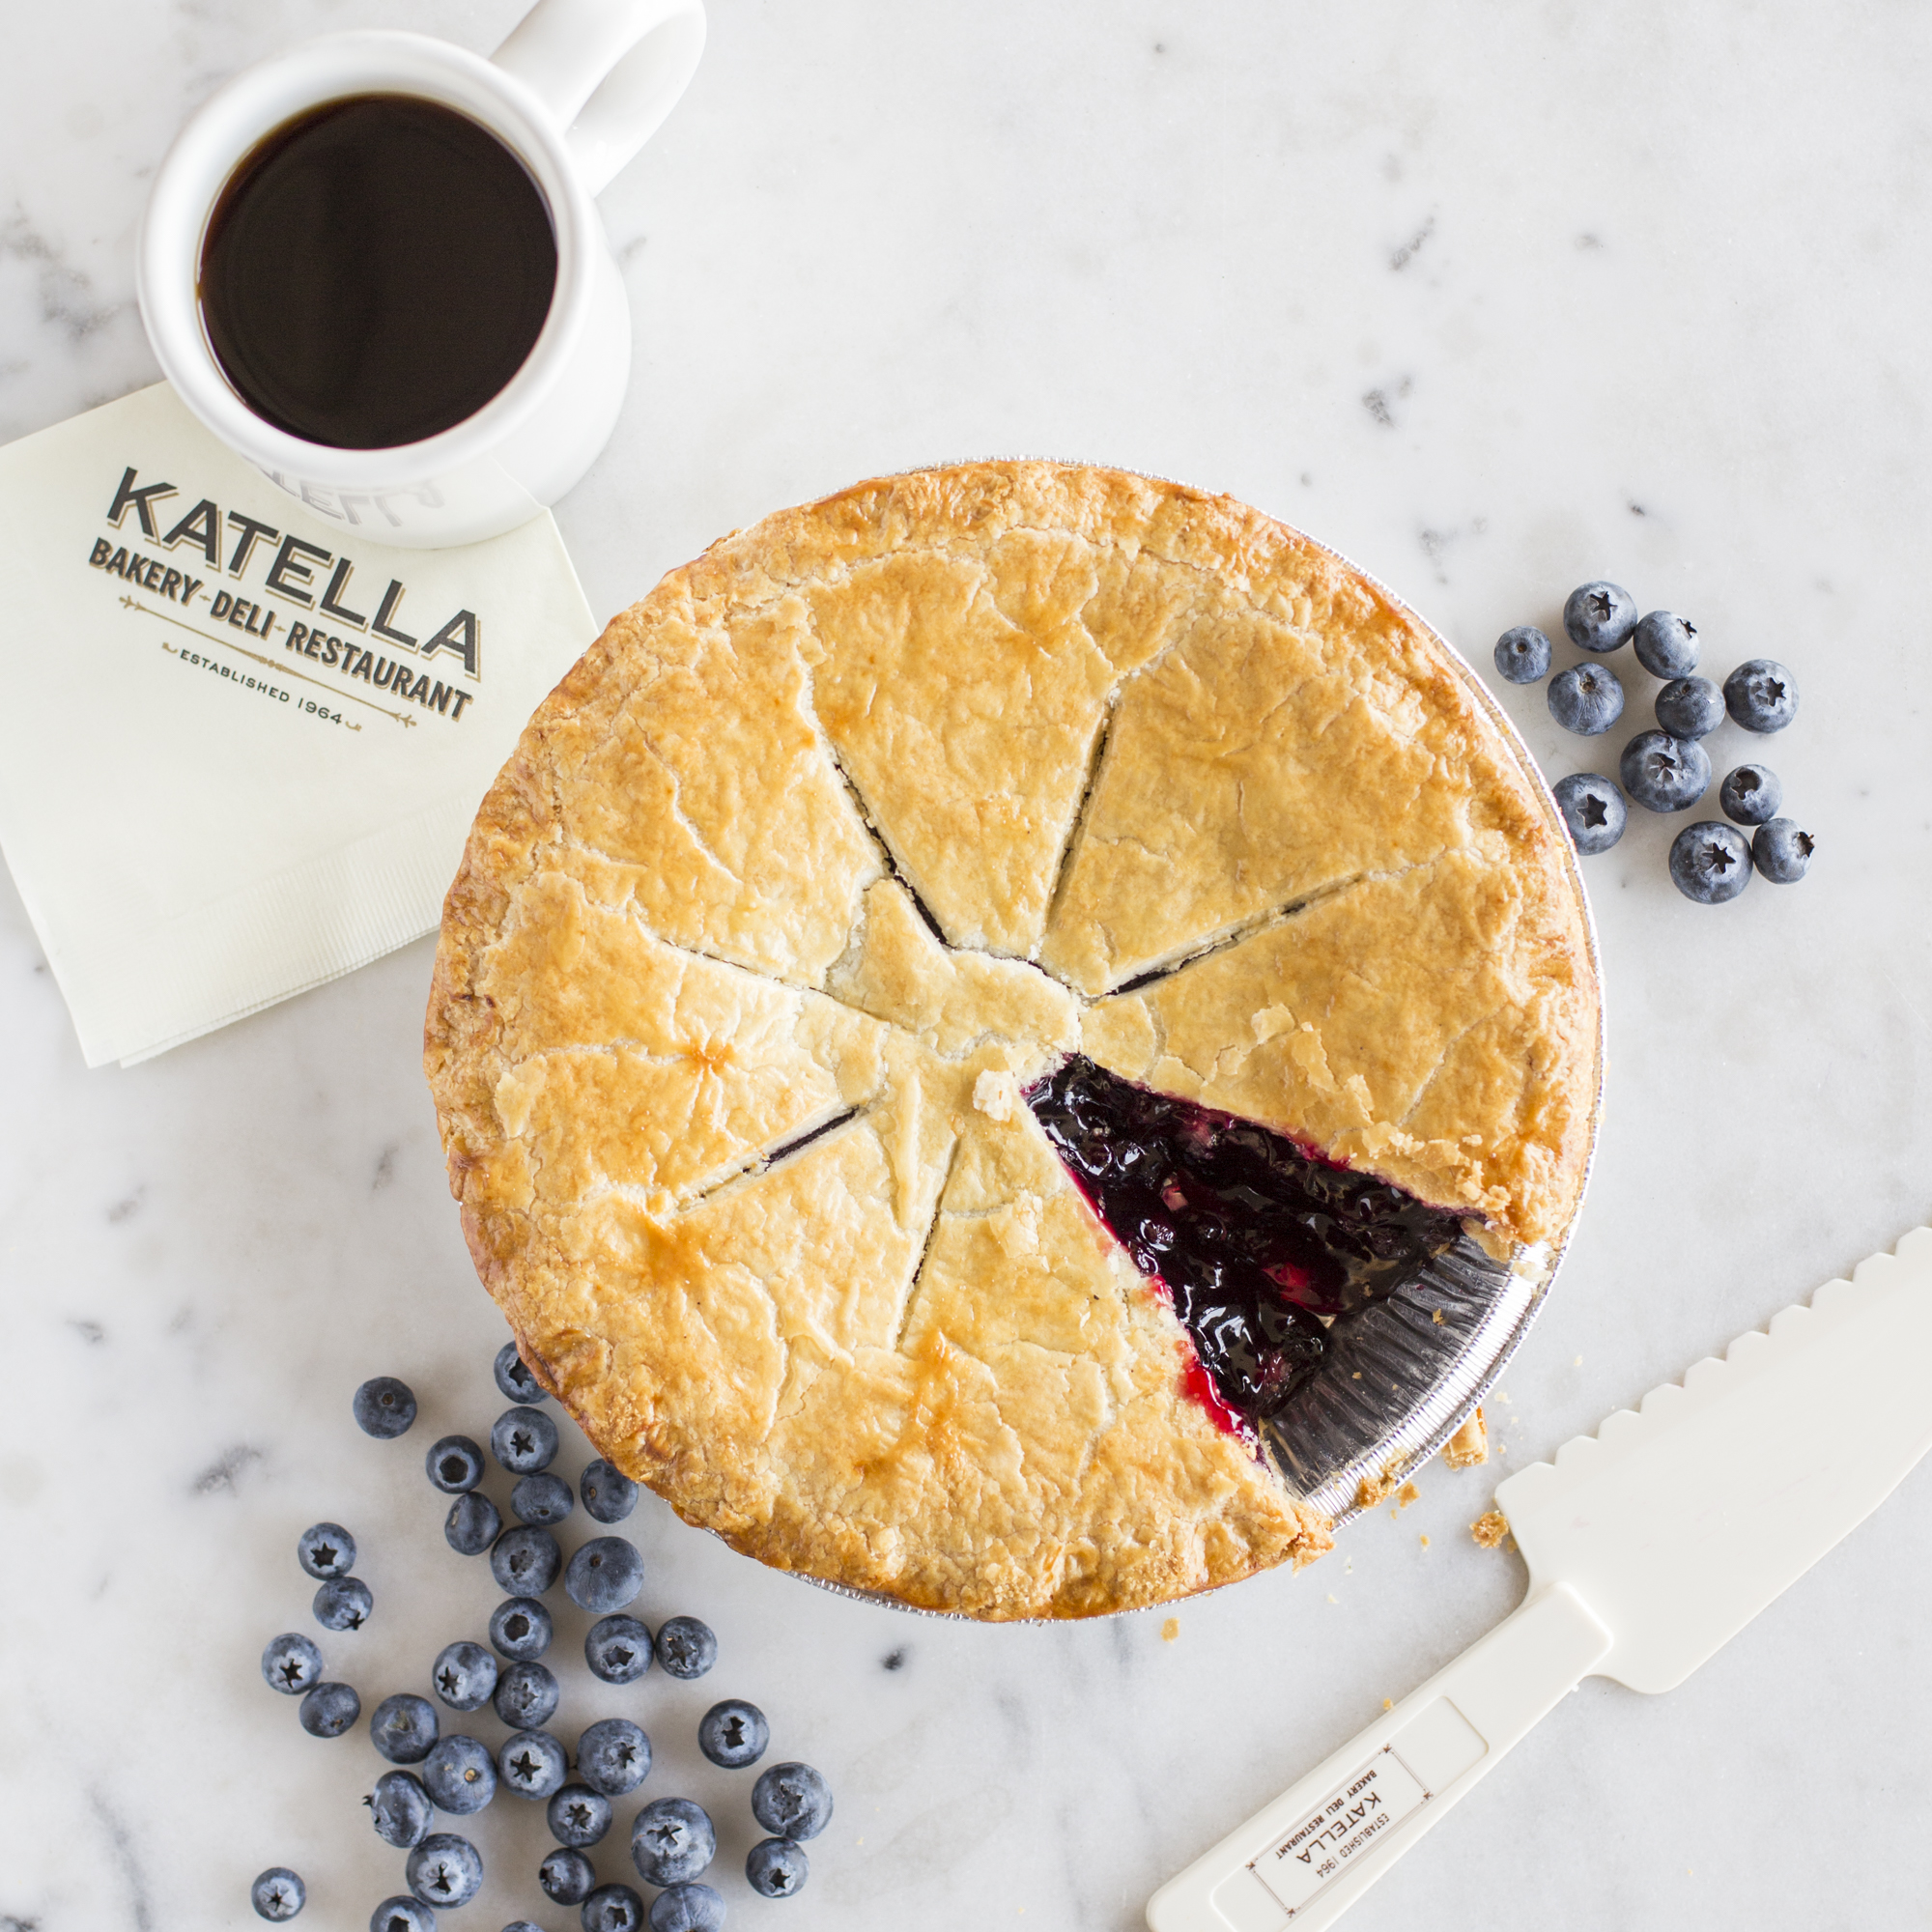 Katella Bakery blueberry pie and a cup of coffee